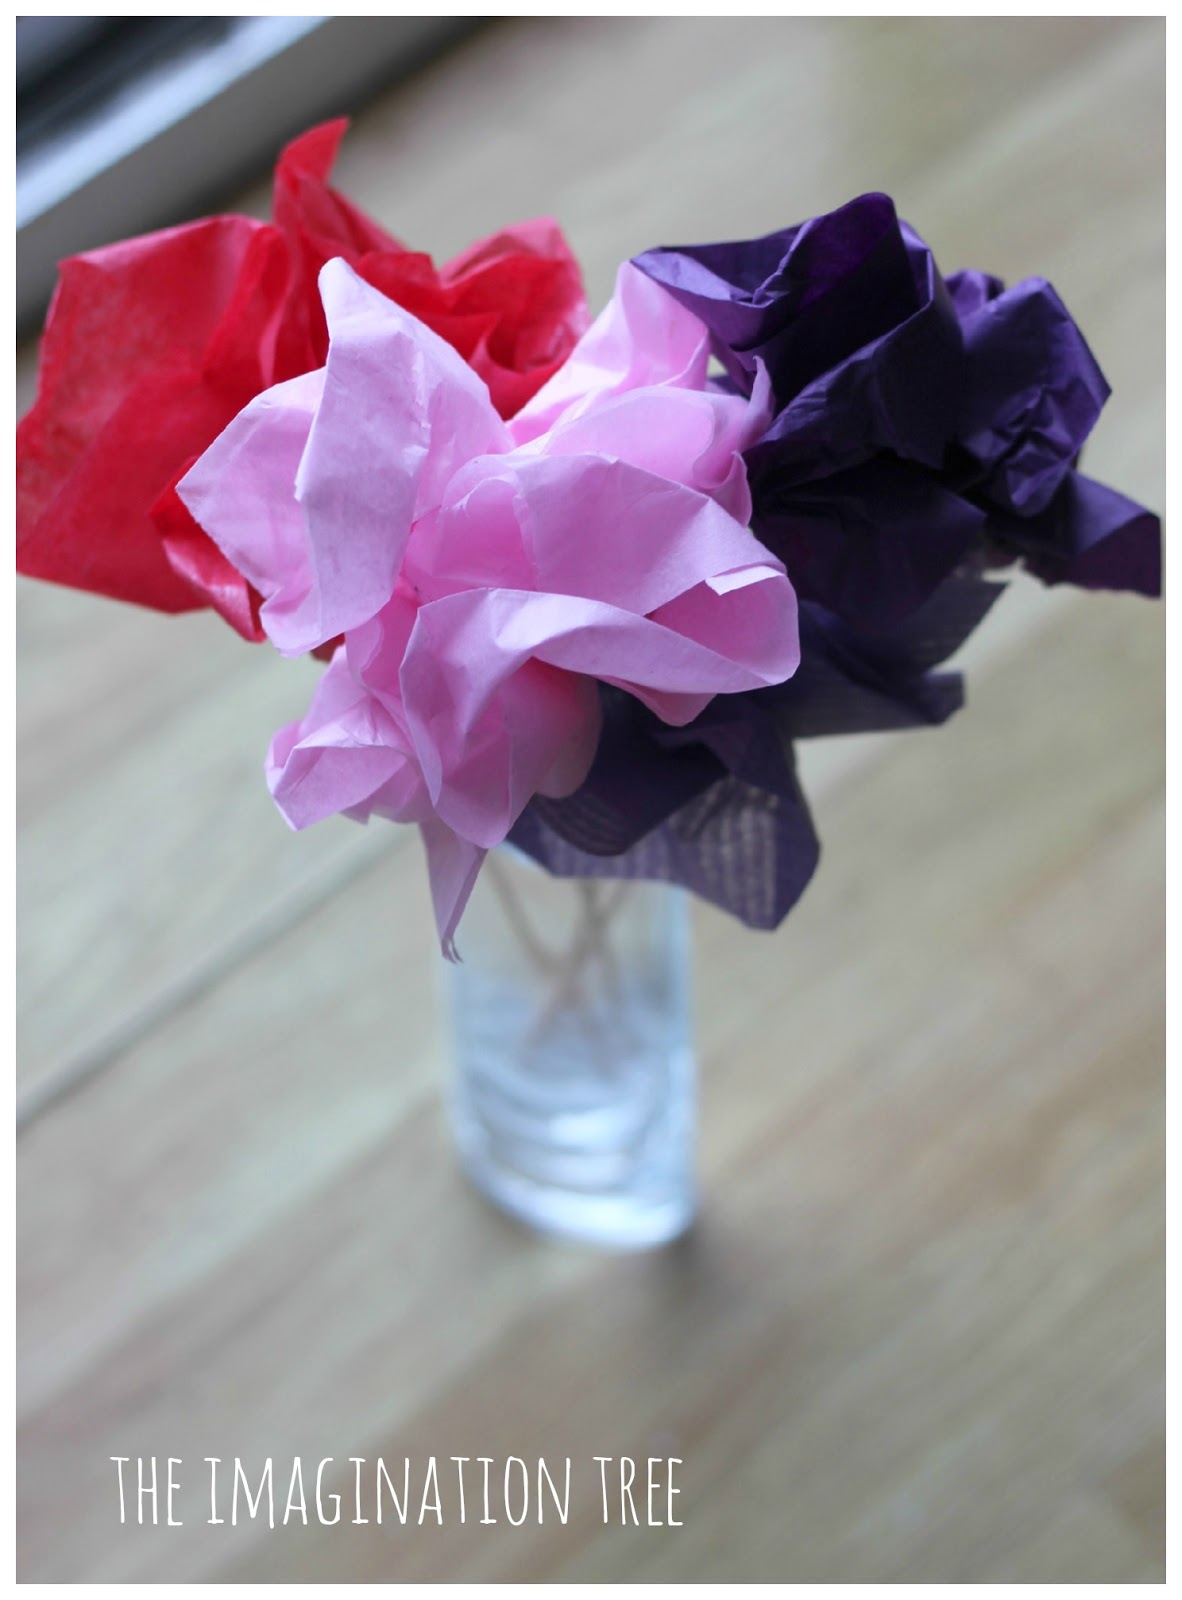 Tissue Paper Flowers - The Imagination Tree